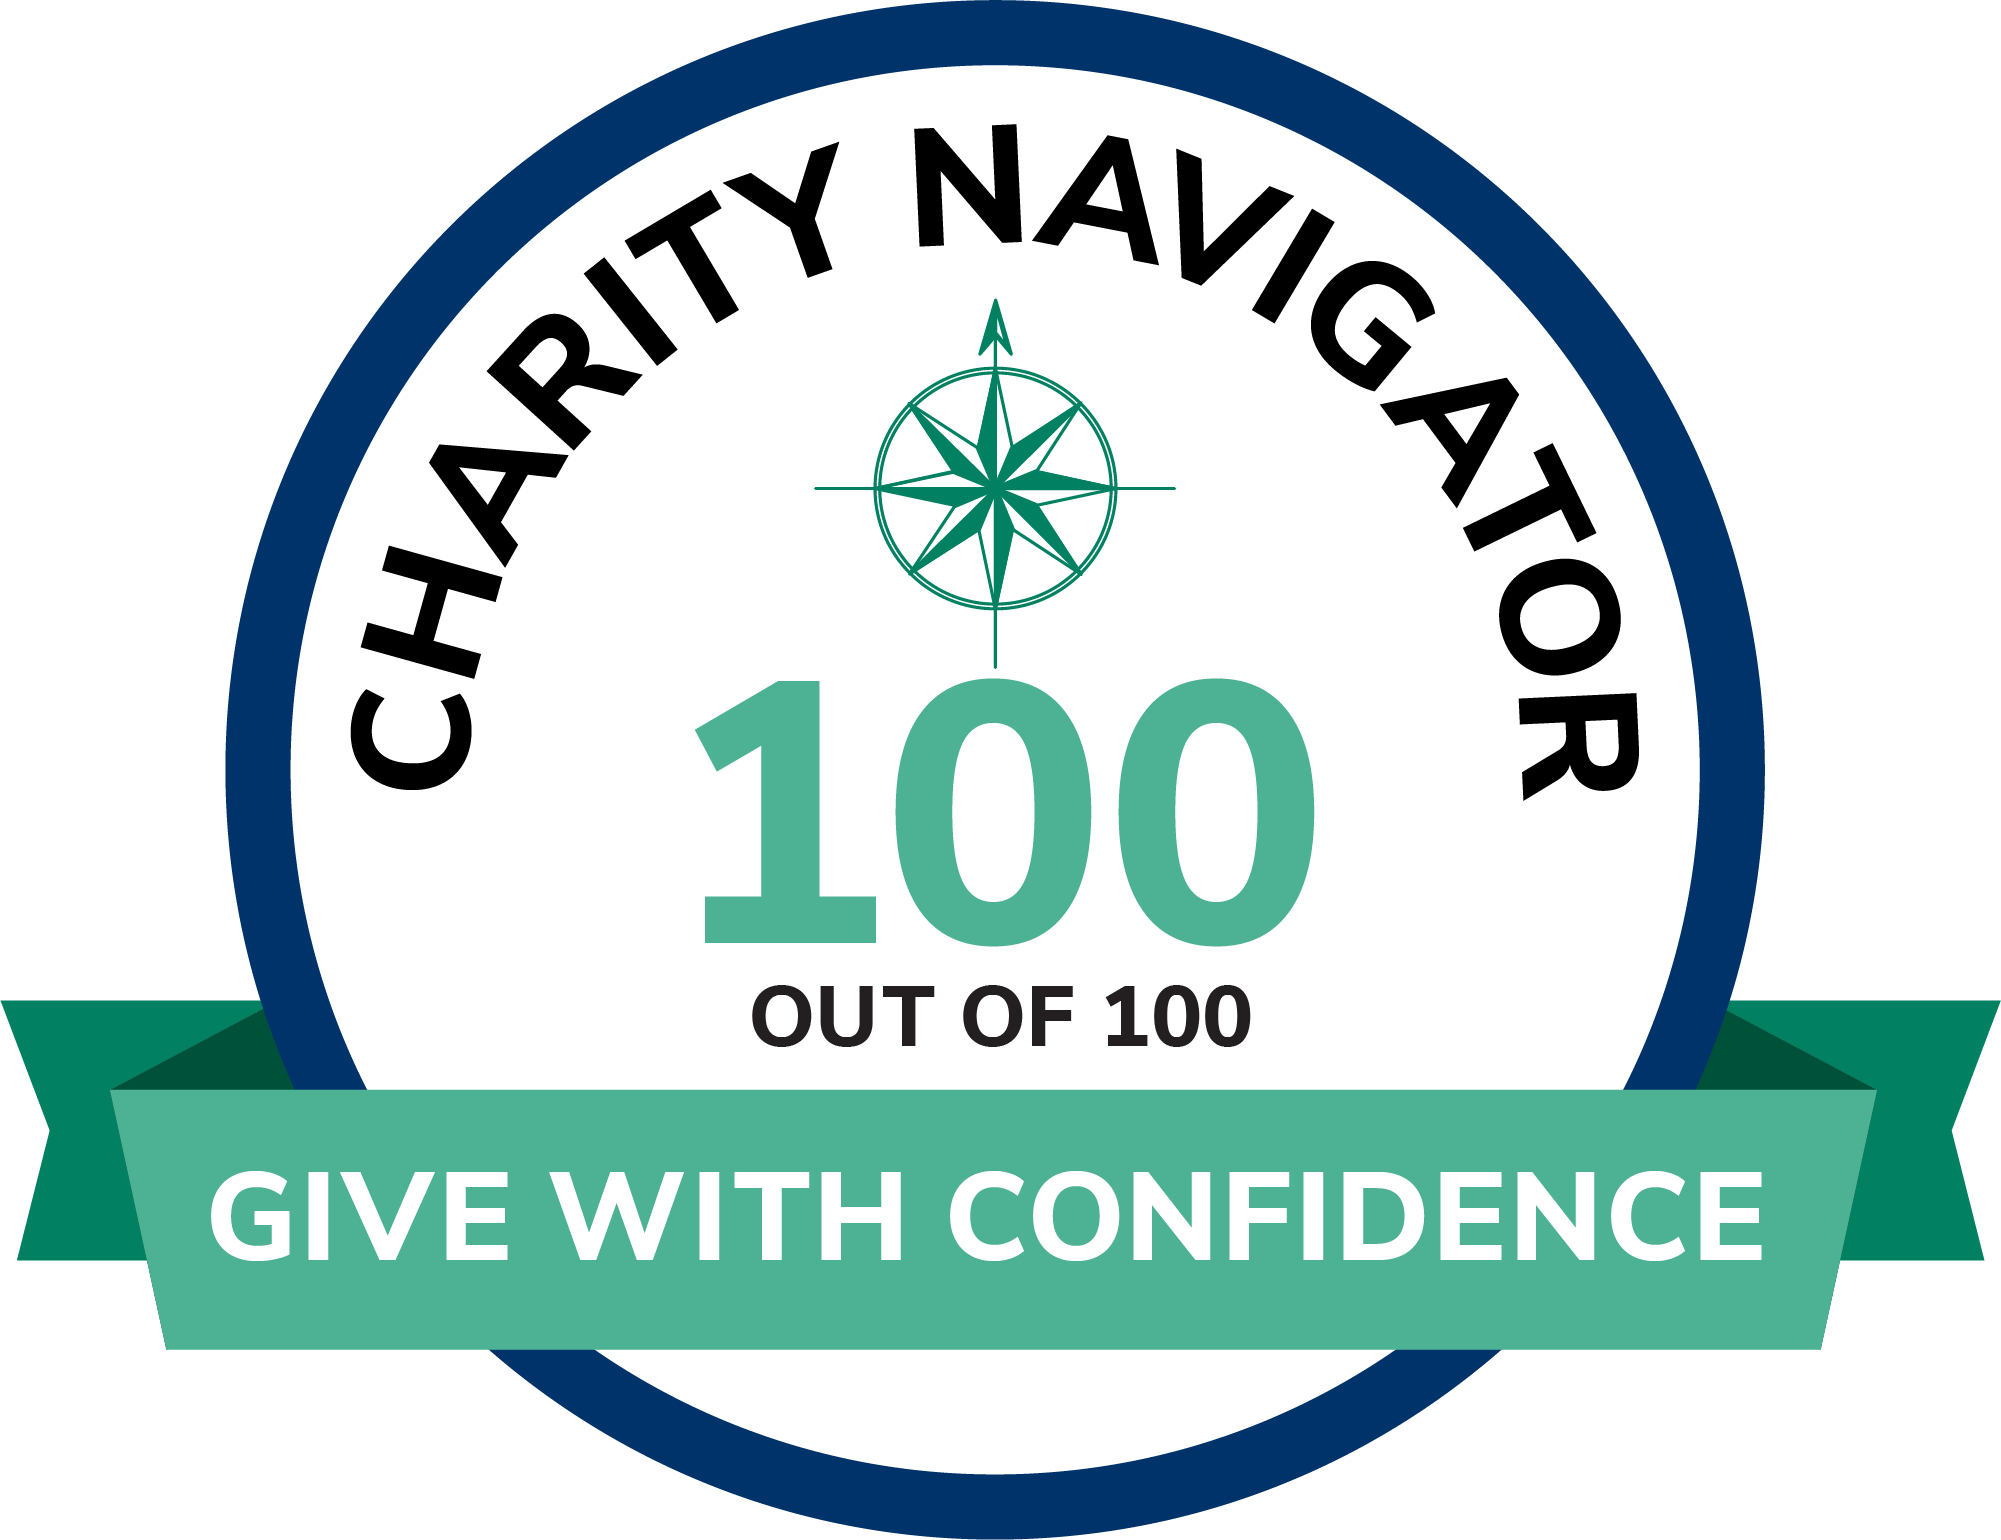 Charity Navigator 100 out of 100, Give With Confidence